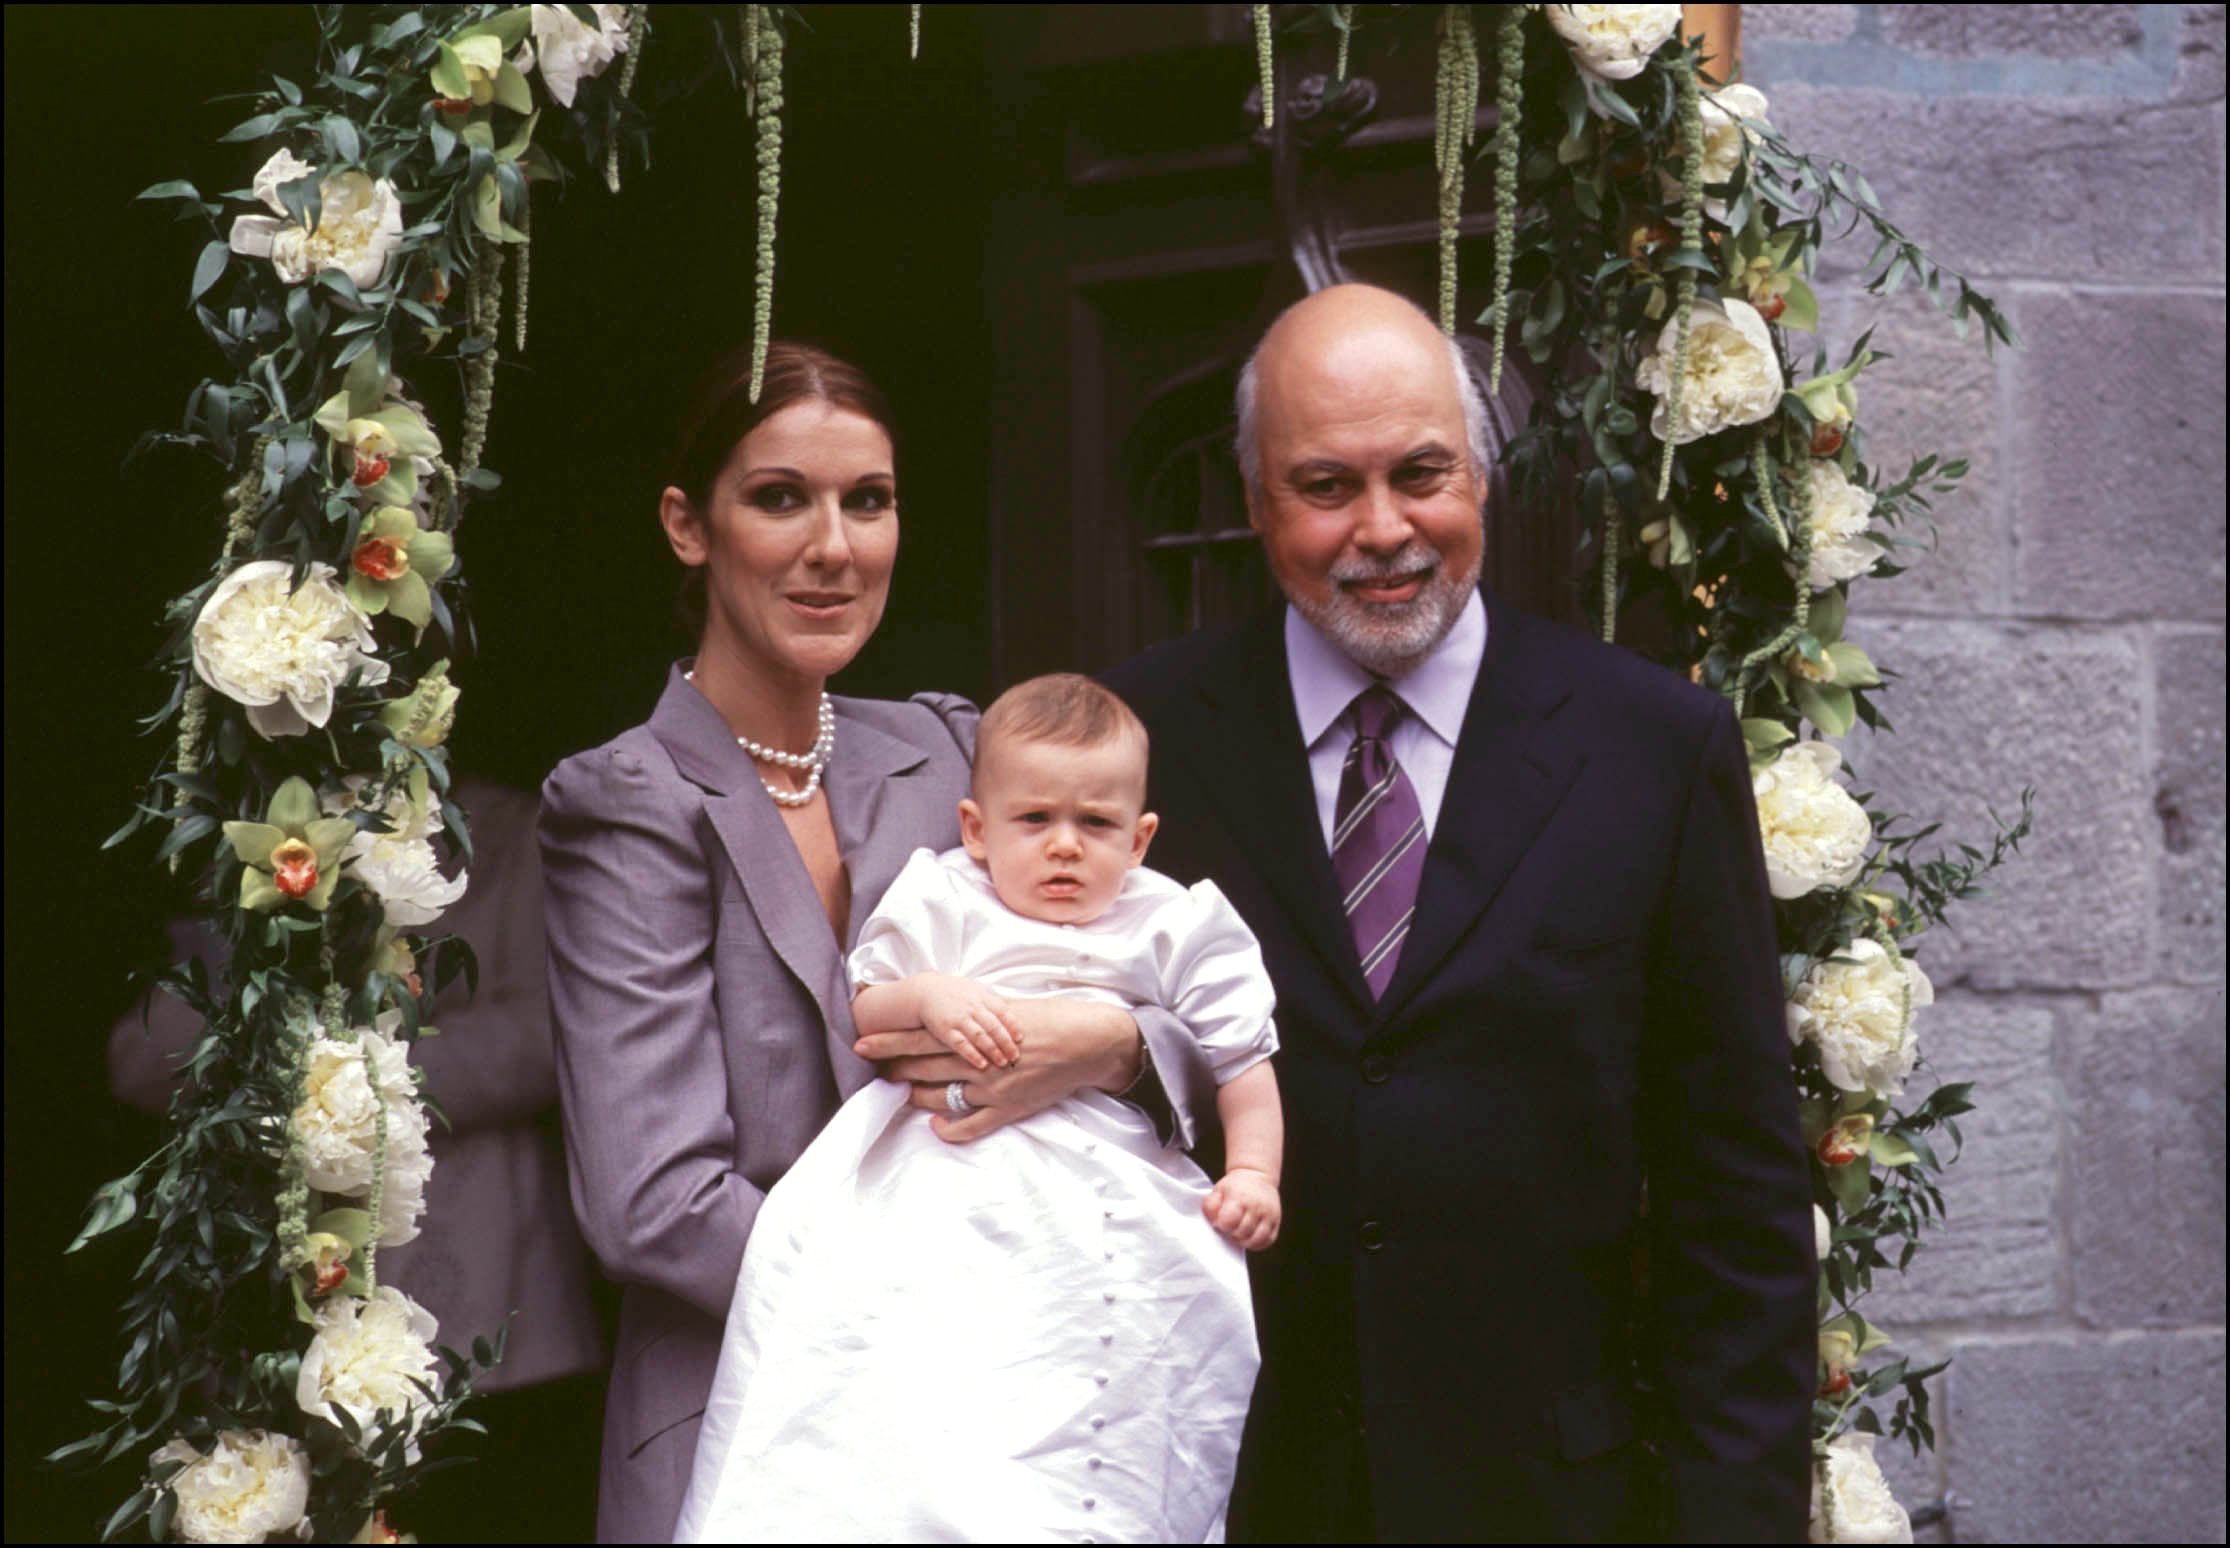 Celine Dion, Rene-Charles and Rene Angelil during the Christening of Rene-Charles on July 25, 2001 in Canada. | Source: Getty Images